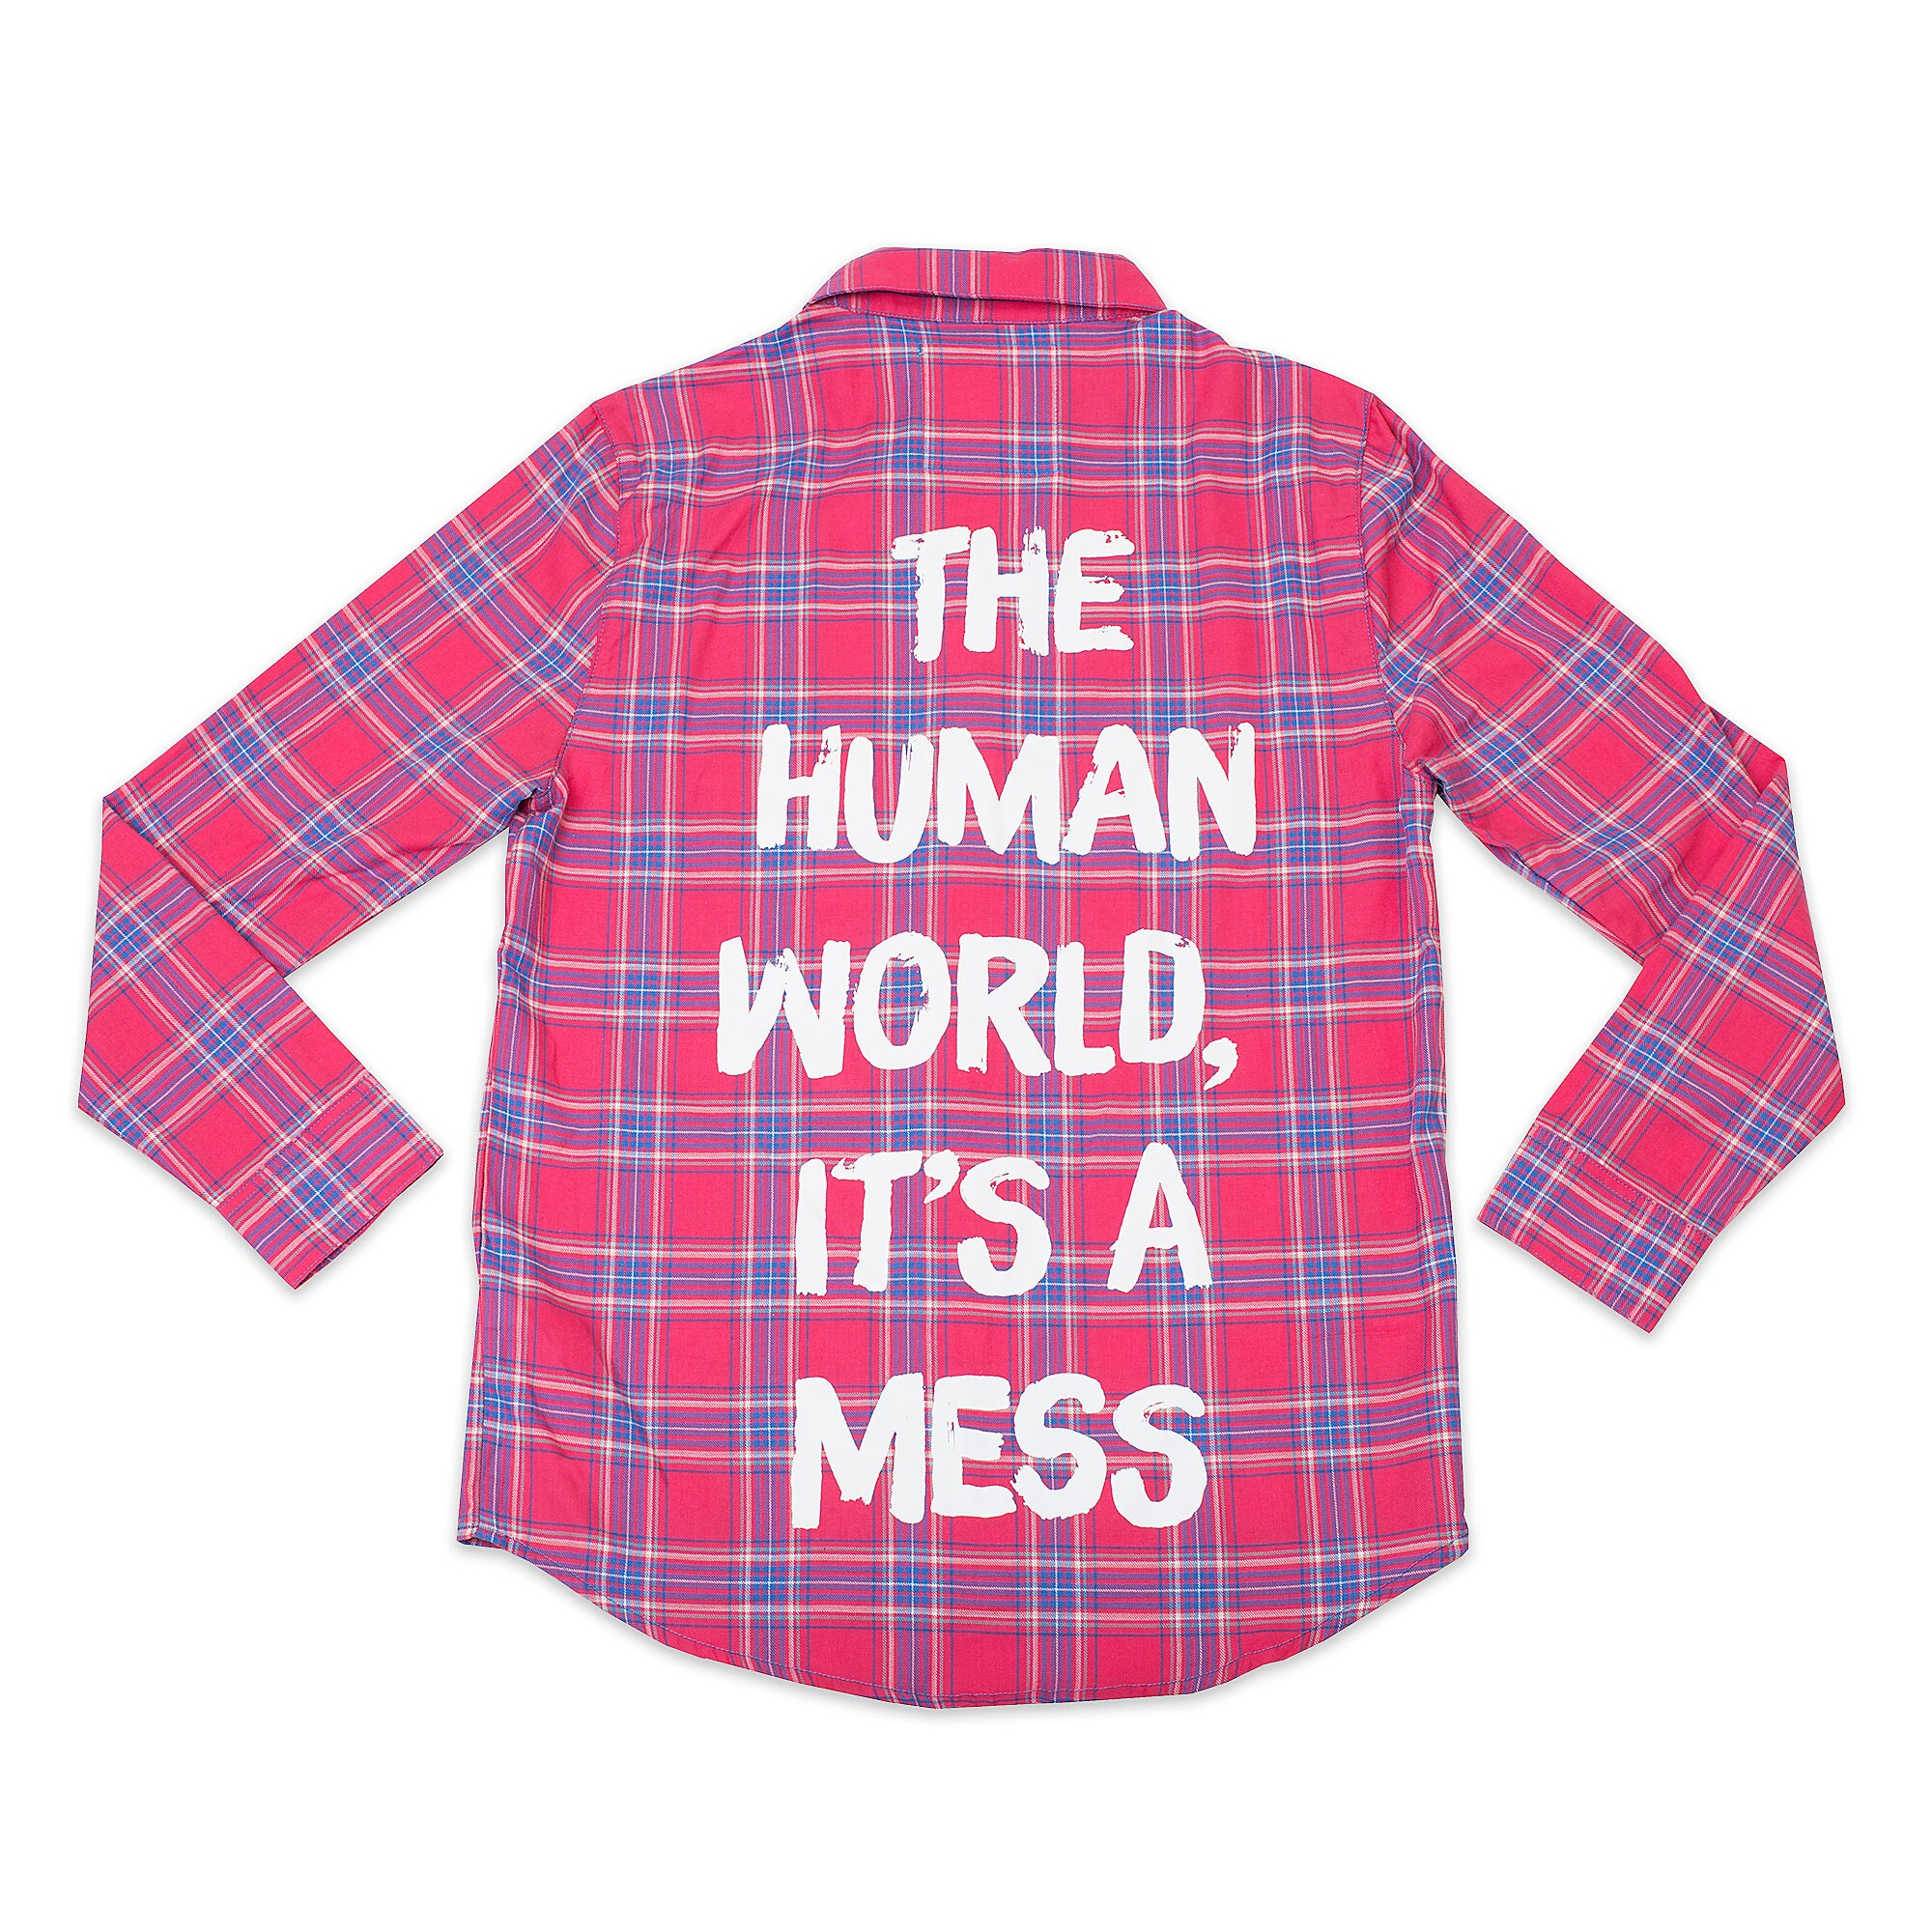 Sebastian Flannel Shirt for Adults by Cakeworthy - The Little Mermaid